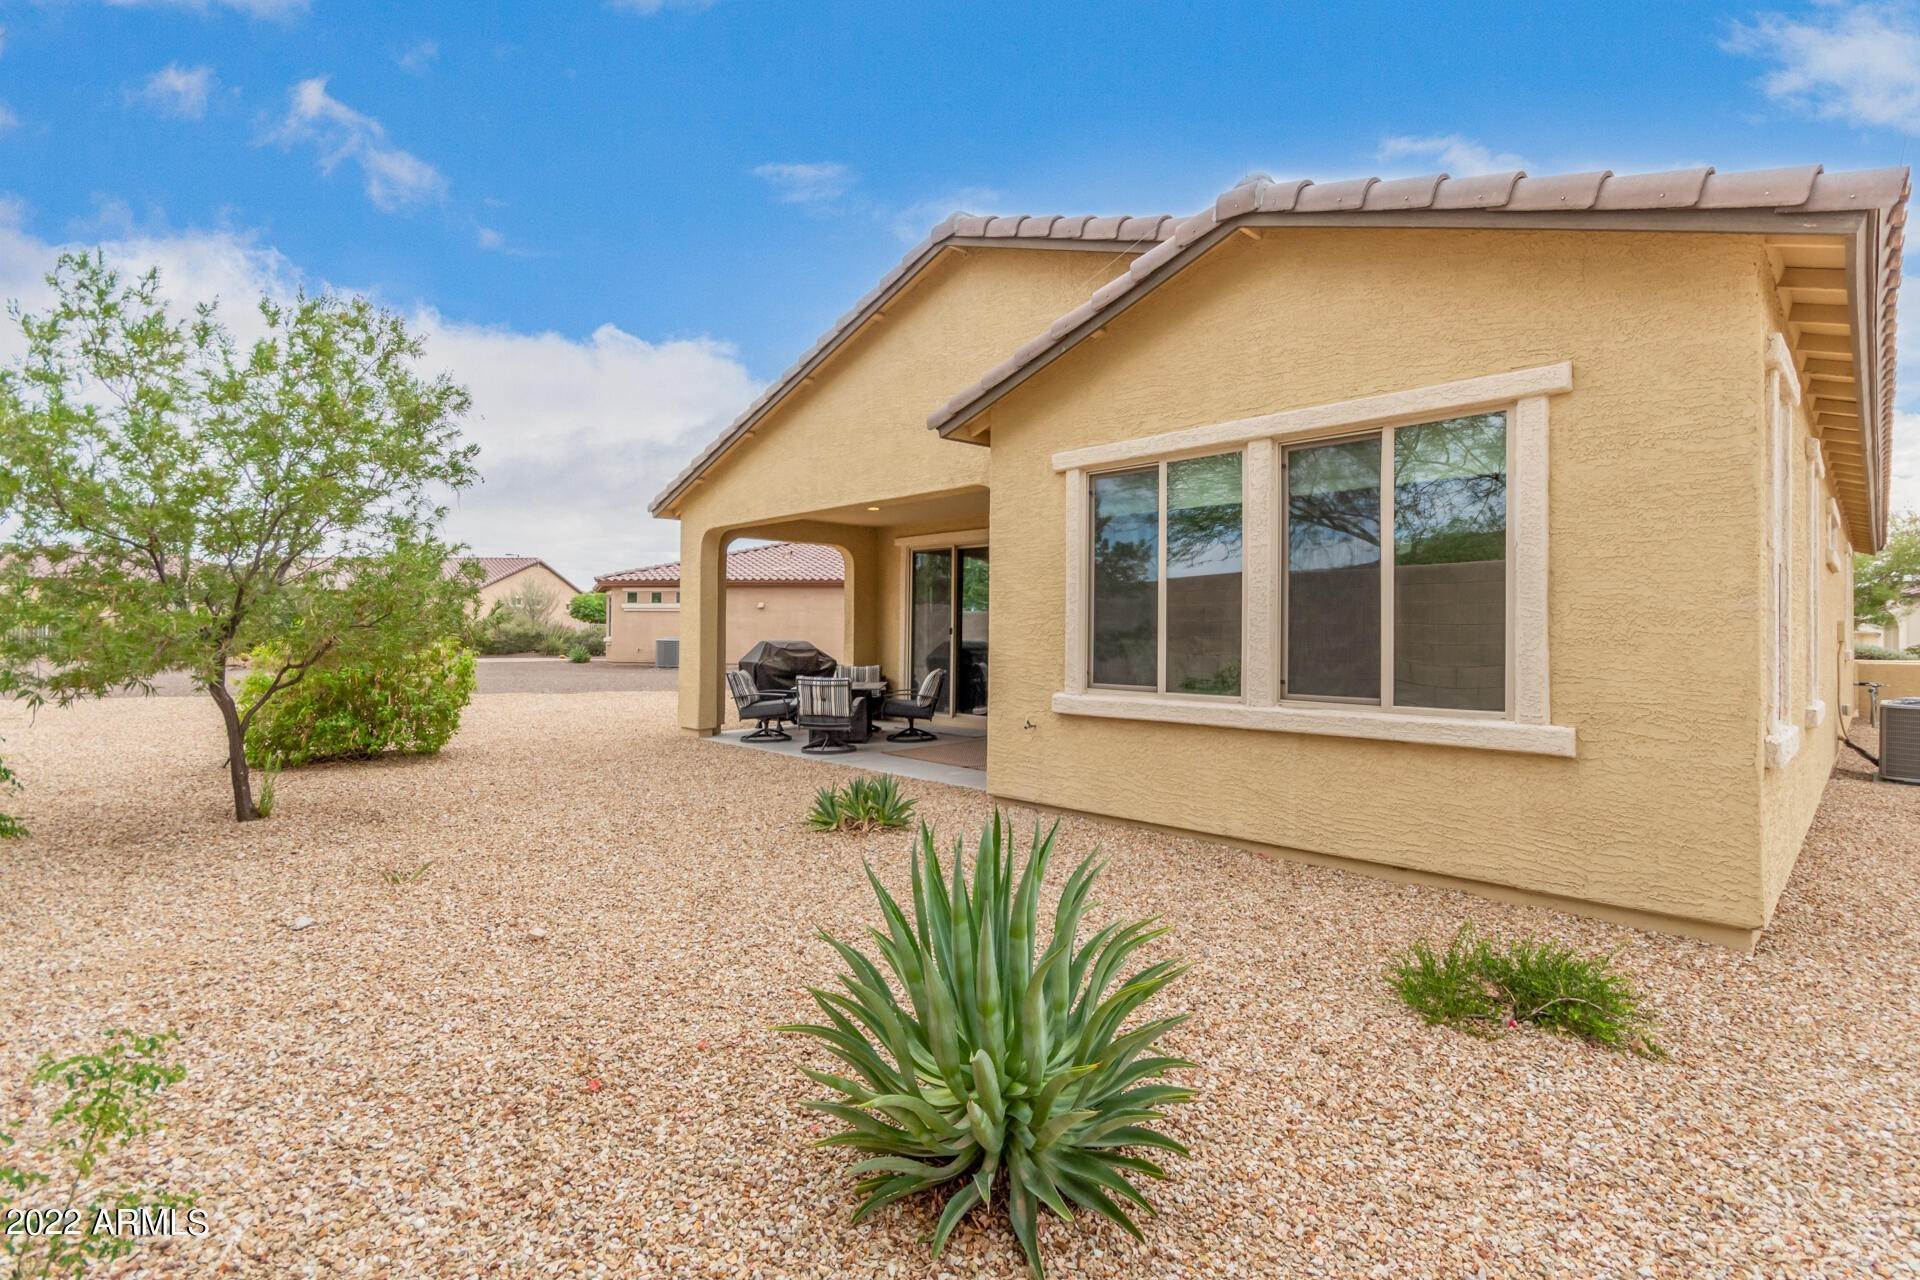 15. Single Family for Sale at Goodyear, AZ 85338